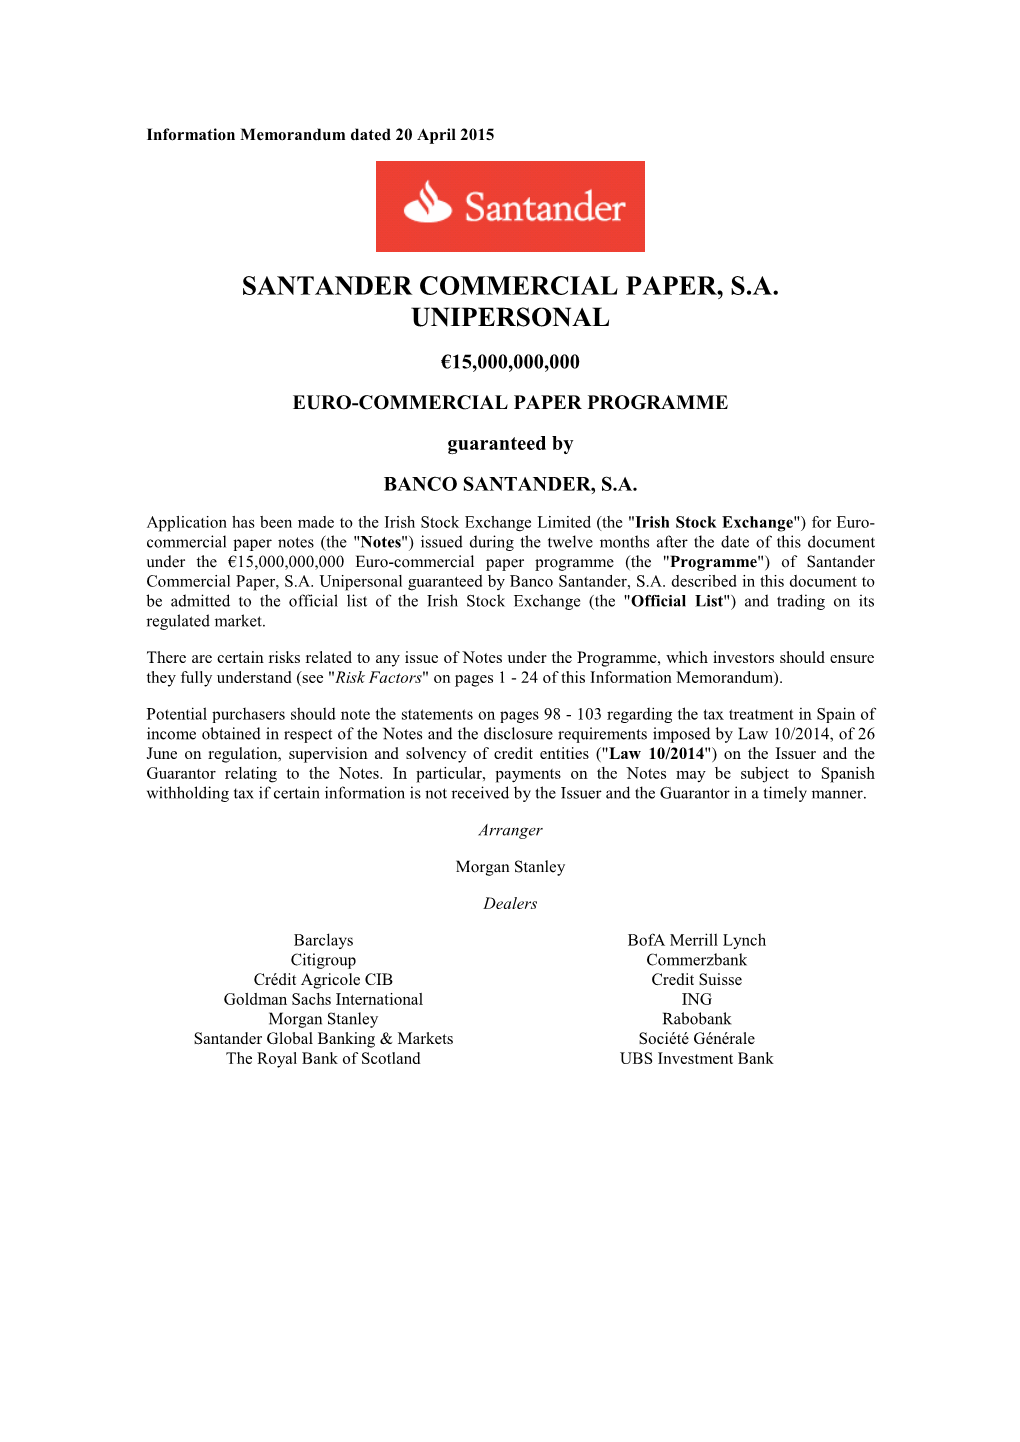 SANTANDER COMMERCIAL PAPER, S.A. UNIPERSONAL €15,000,000,000 EURO-COMMERCIAL PAPER PROGRAMME Guaranteed by BANCO SANTANDER, S.A